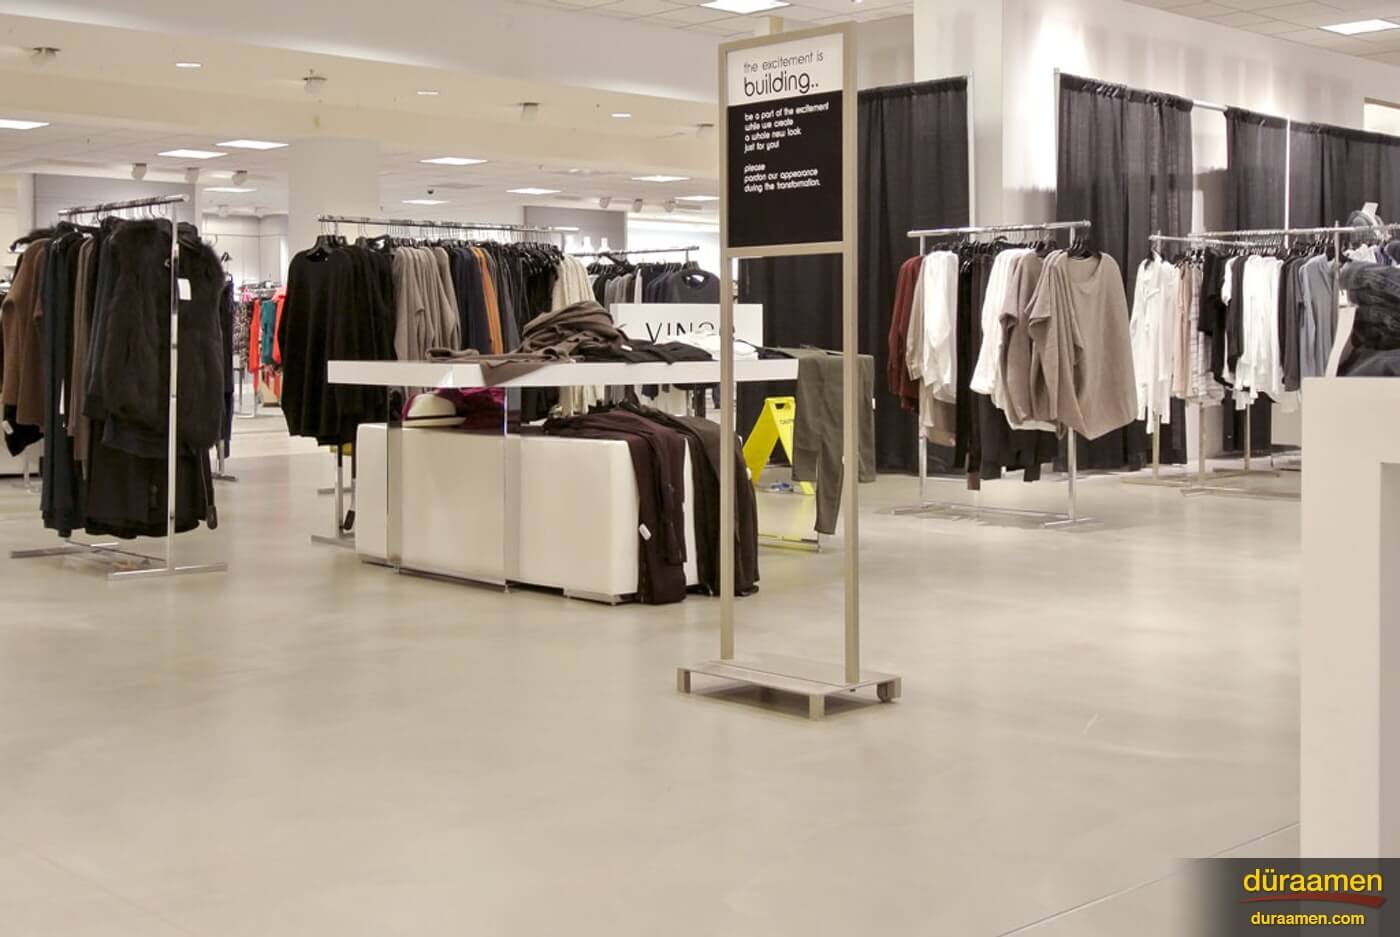 This Short Hills NJ Bloomingdales department store had Düraamen self leveling concrete flooring installed to help maintain their brands high end look and feel How Duraamens Epoxy Solutions Transform Spaces | Duraamen Engineered Products Inc